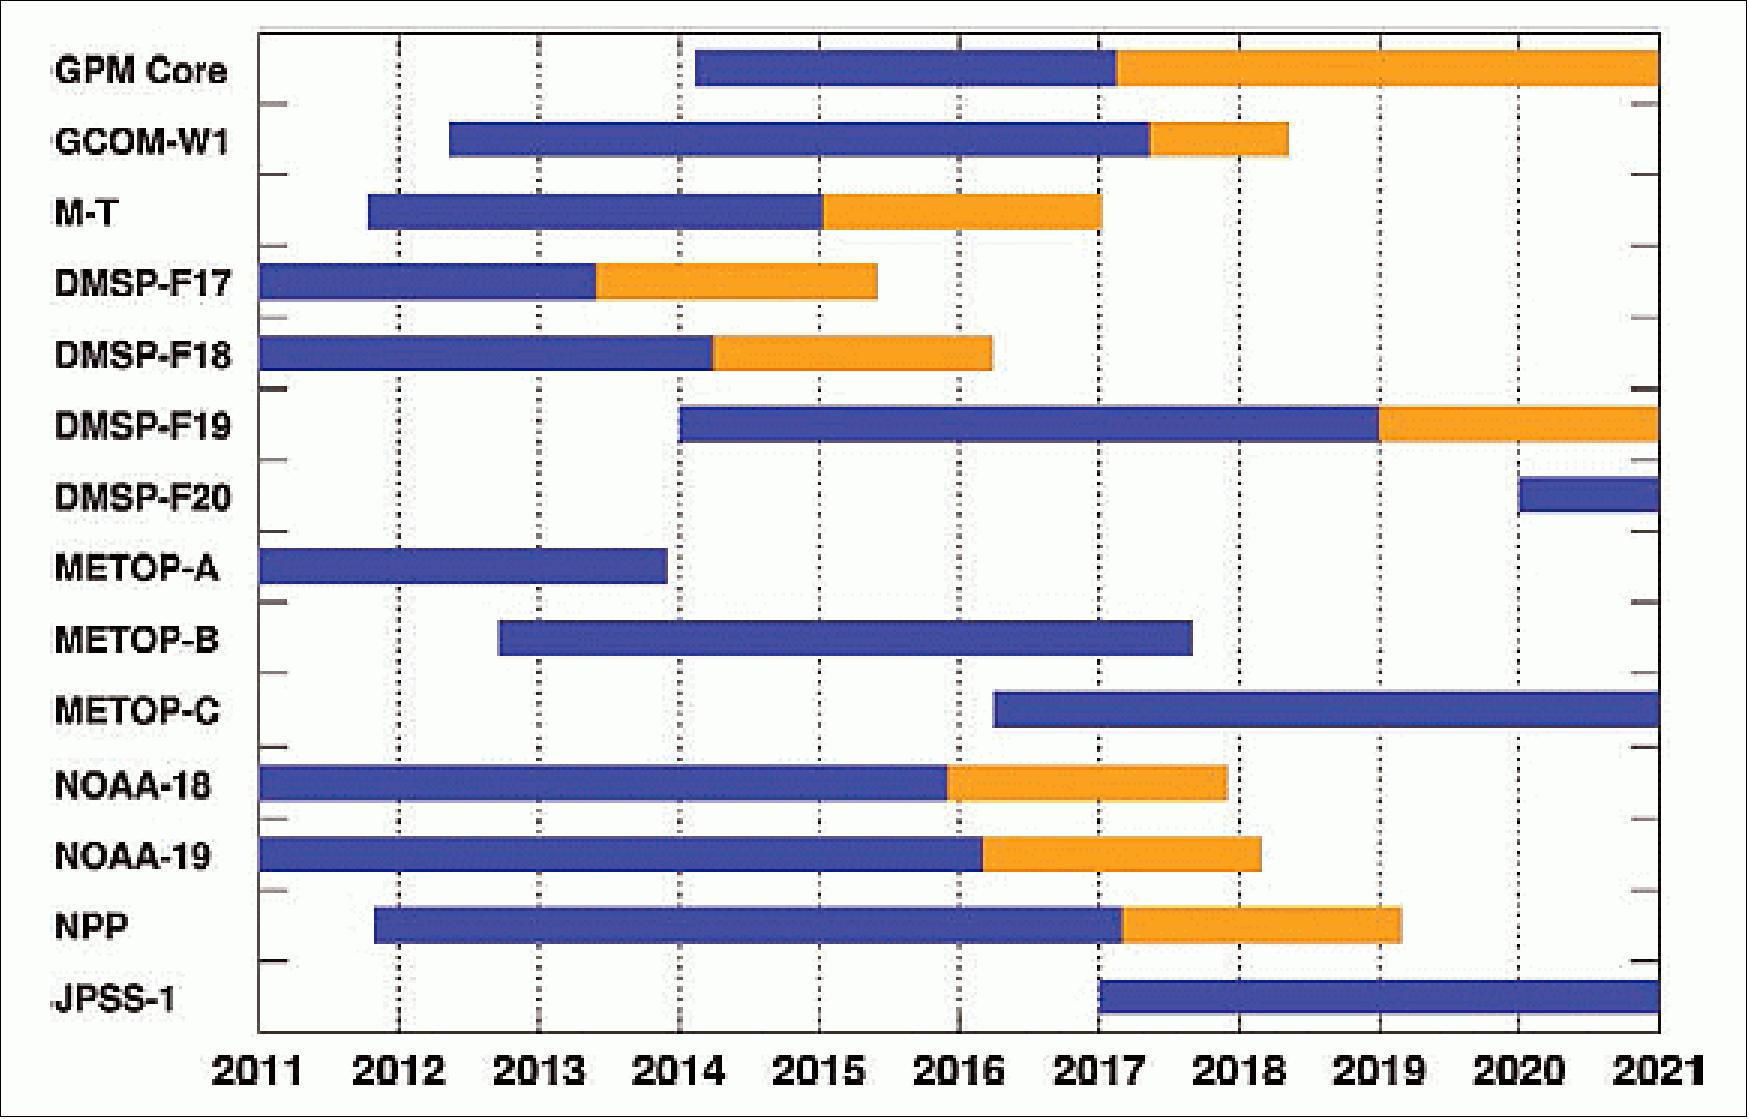 Figure 3: Estimated launch schedules and life spans of GPM constellation satellites, with blue denoting the primary mission phase and yellow the extended mission phase. GPM Core Observatory operations beyond the primary mission phase are subject to science and satellite performance evaluation after launch (image credit: GPM Team, Ref. 18)